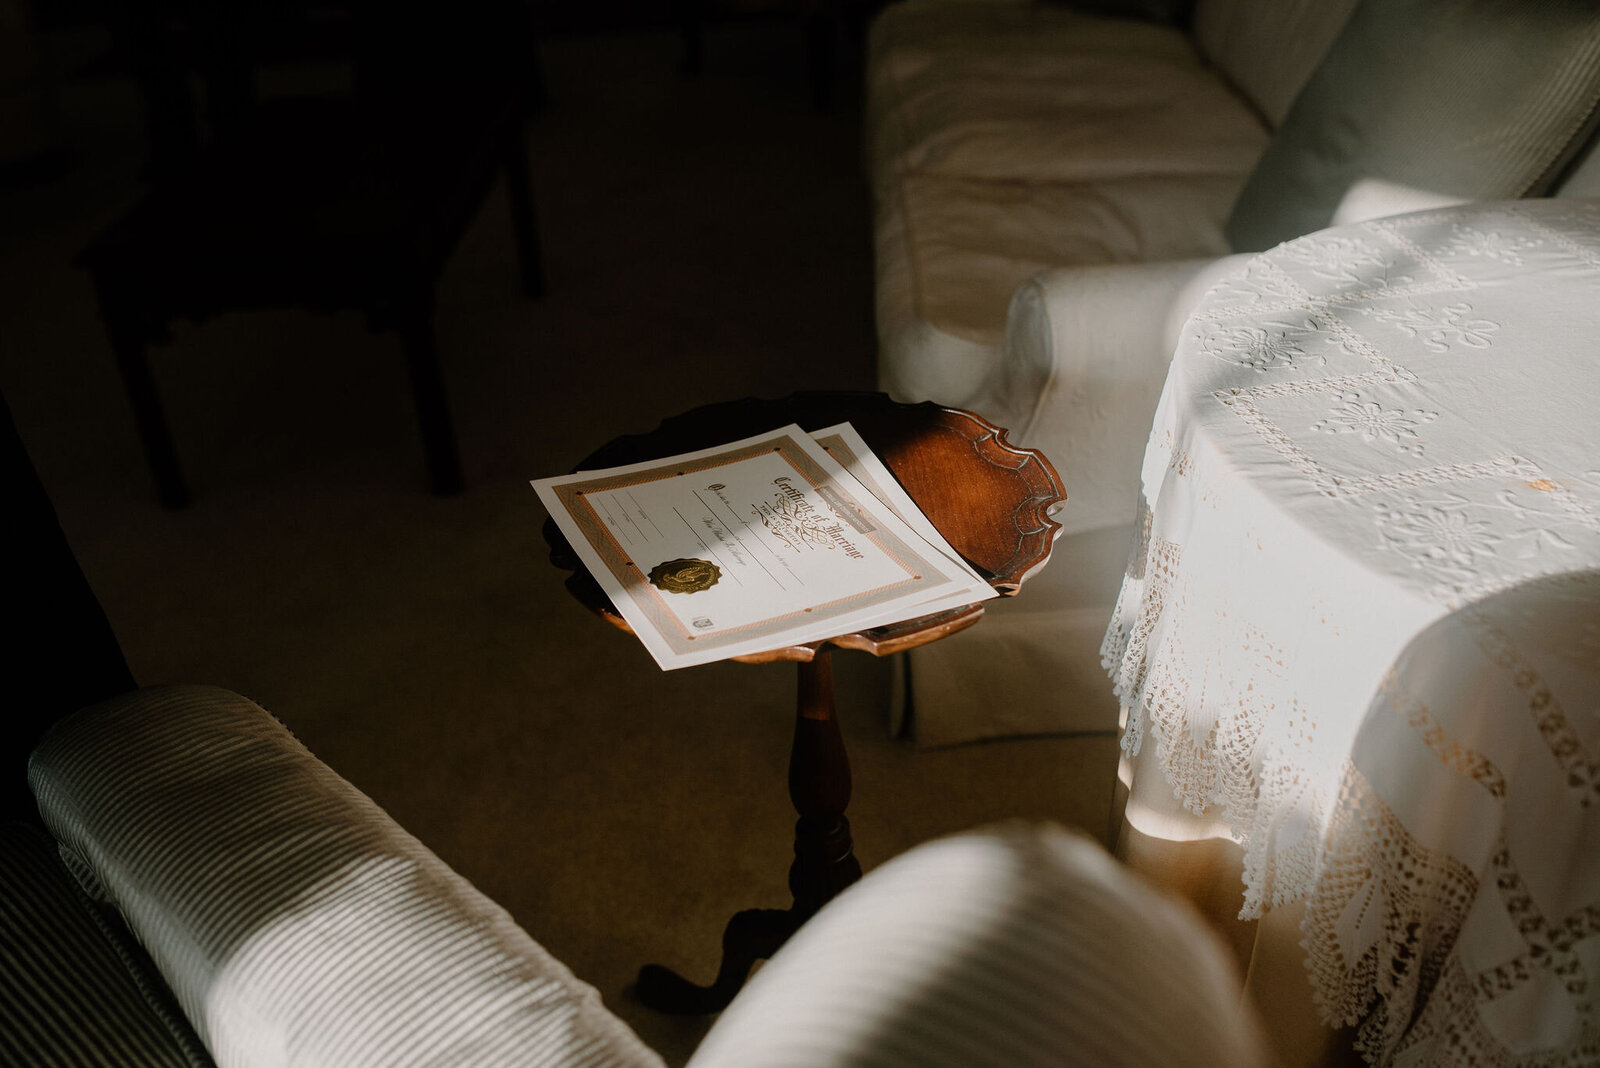 certificate of marriage license on side table with elegant wedding details